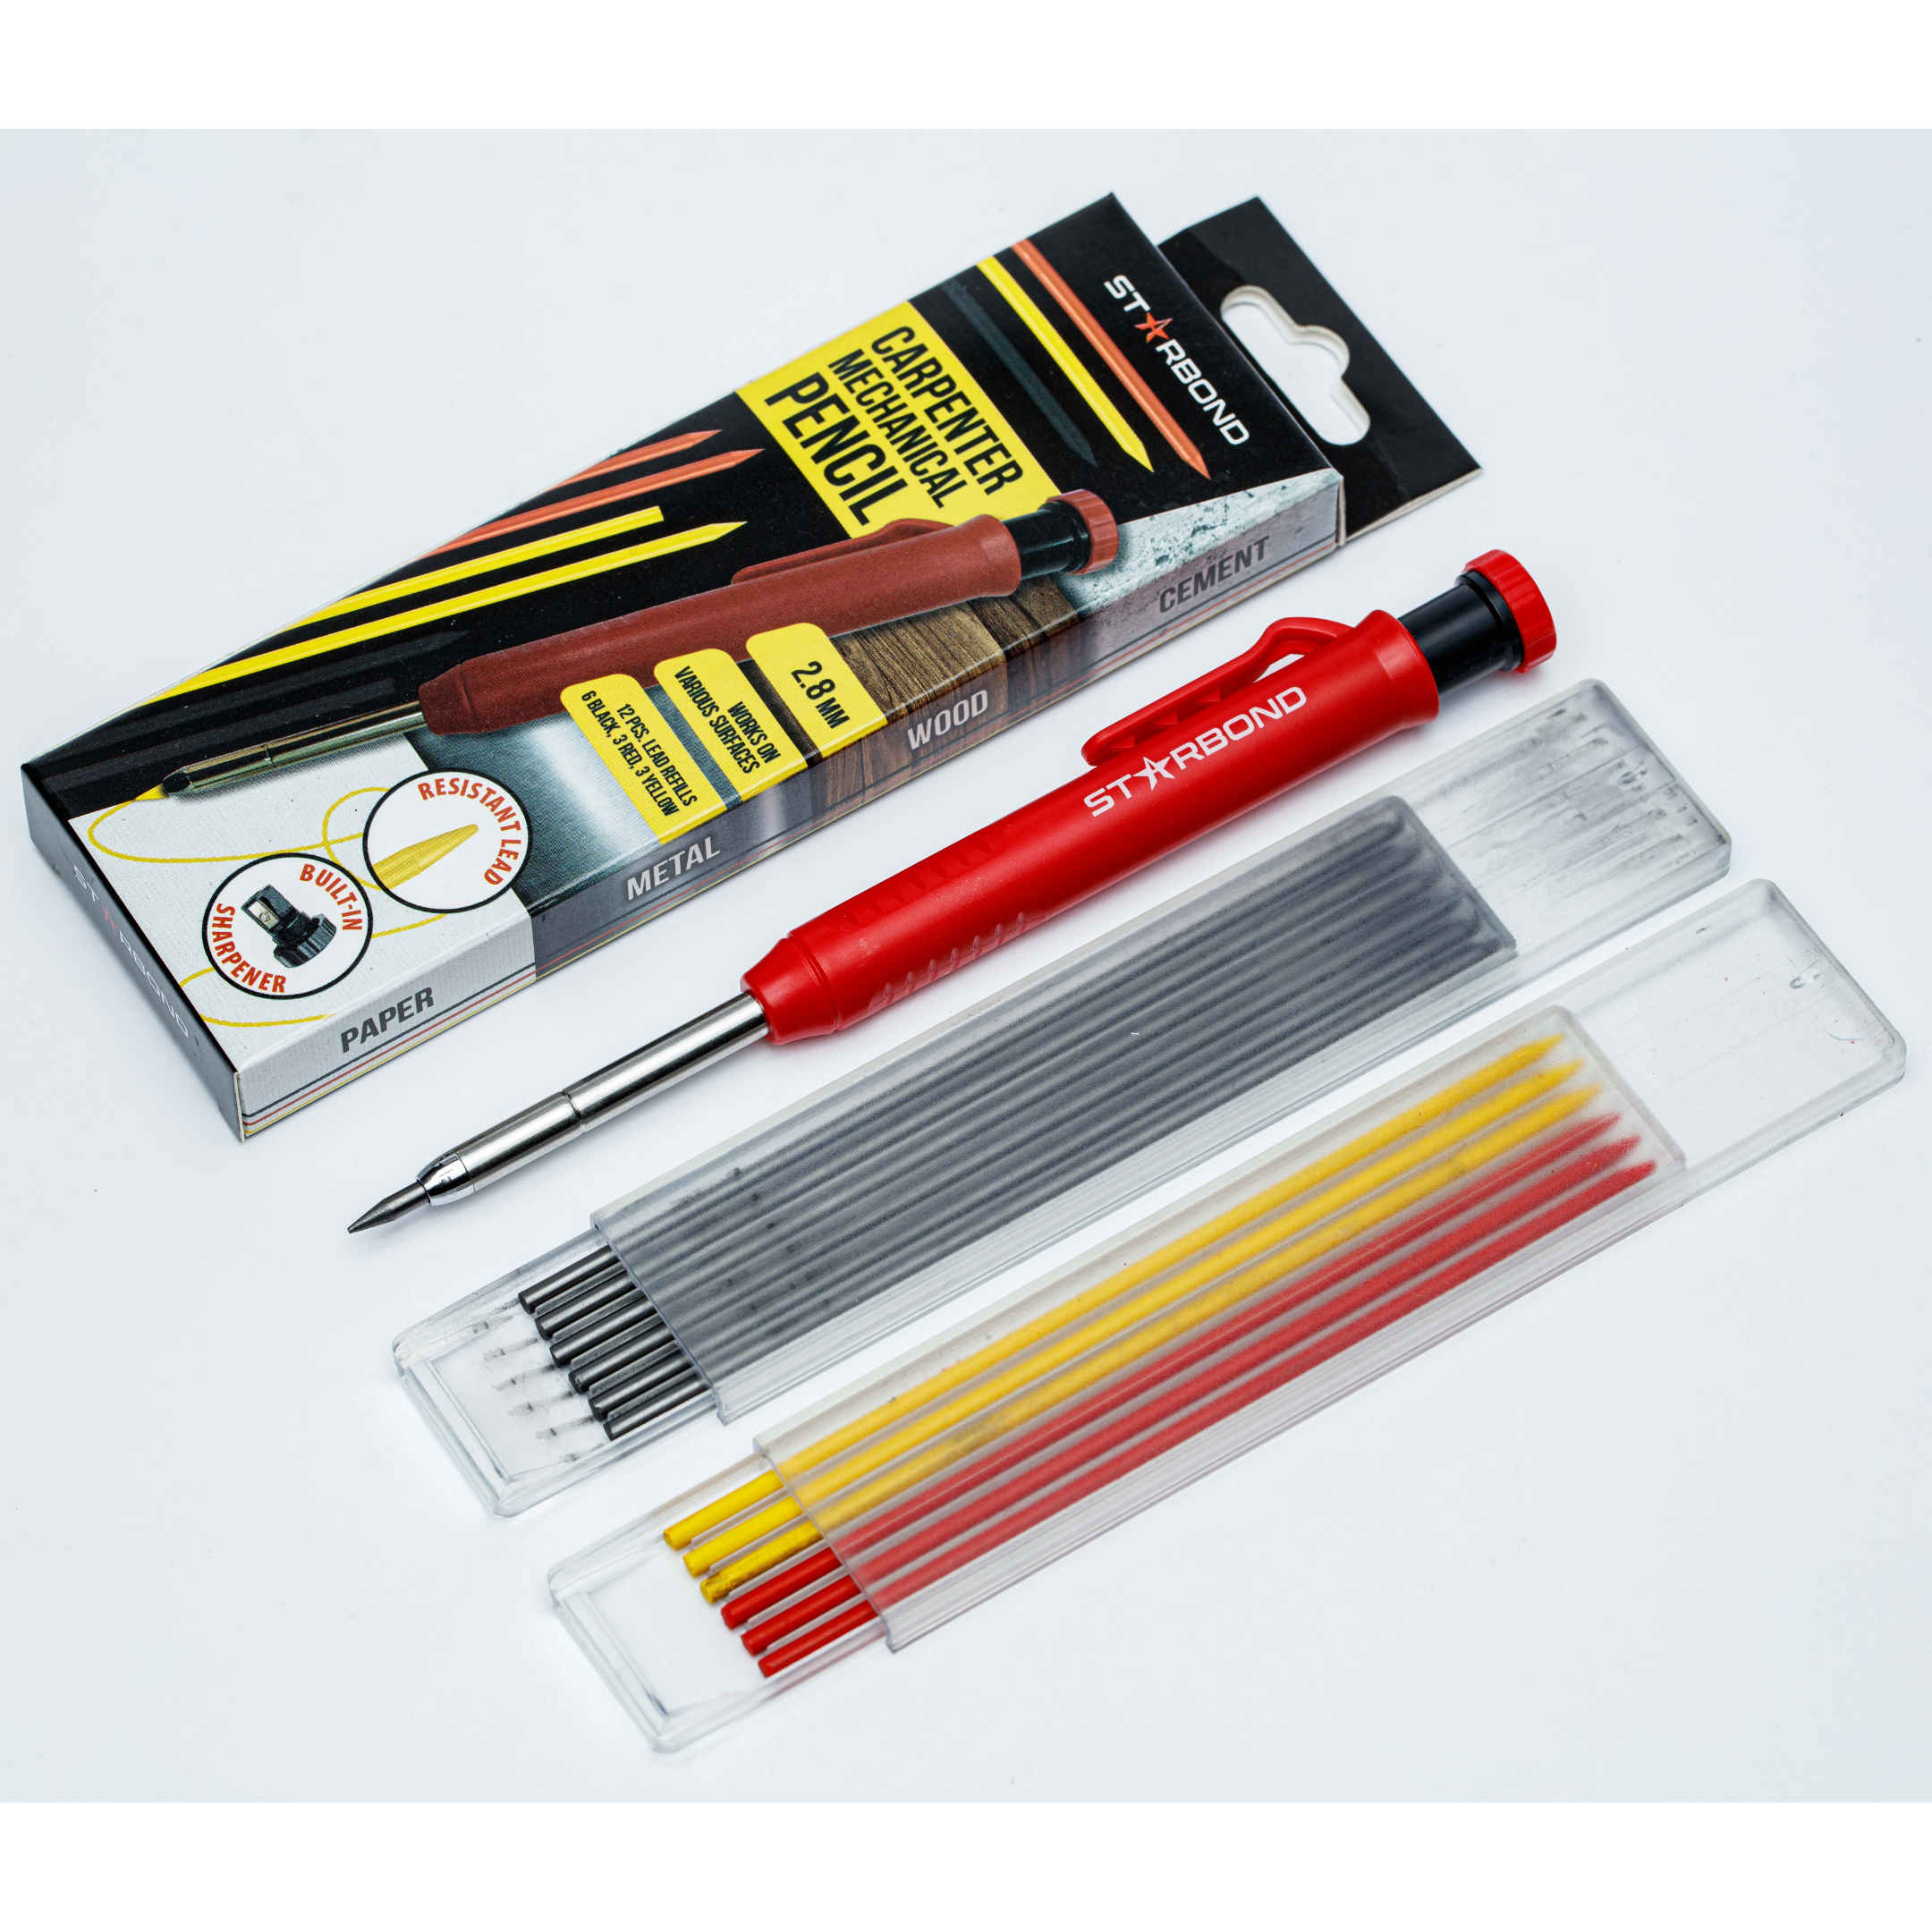 Starbond Carpenter Mechanical Pencil - Includes 12 Wax Refill Leads + Built-In Sharpener Black Pencil